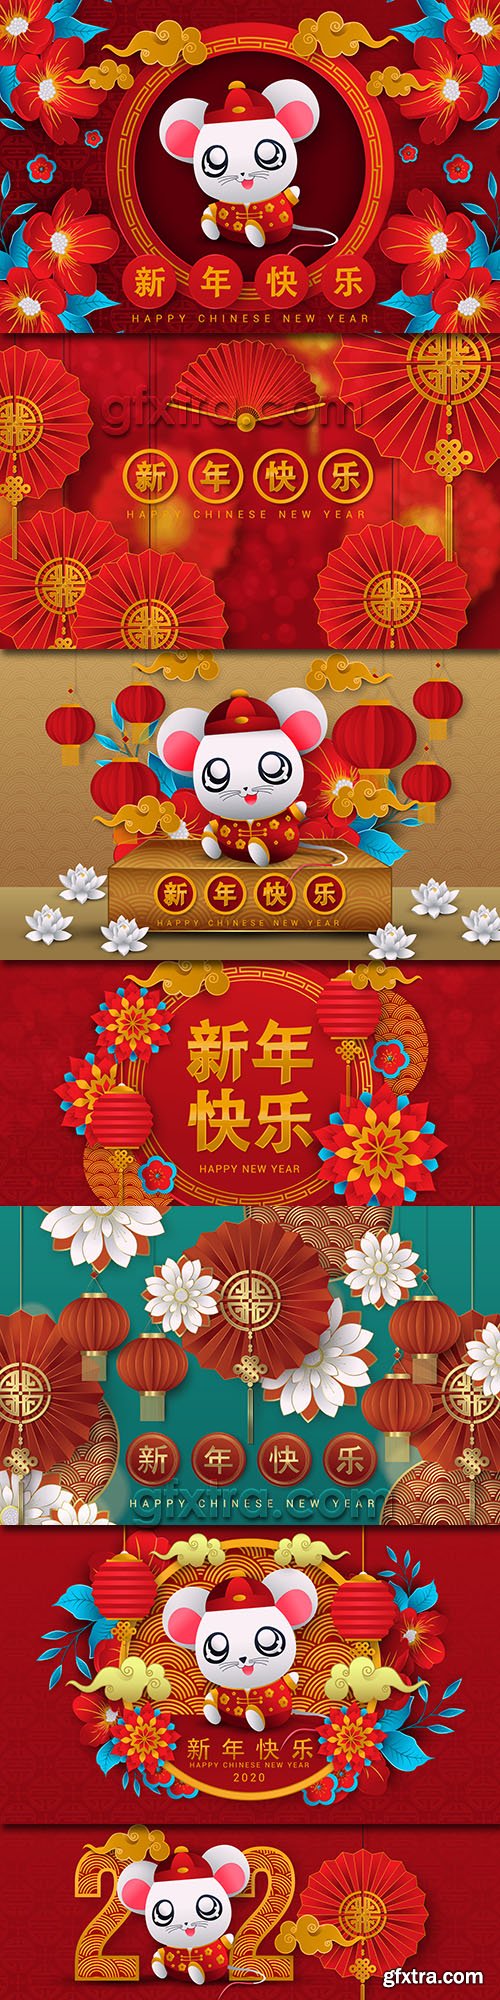 Happy Chinese New Year rat red decor backgrounds 6